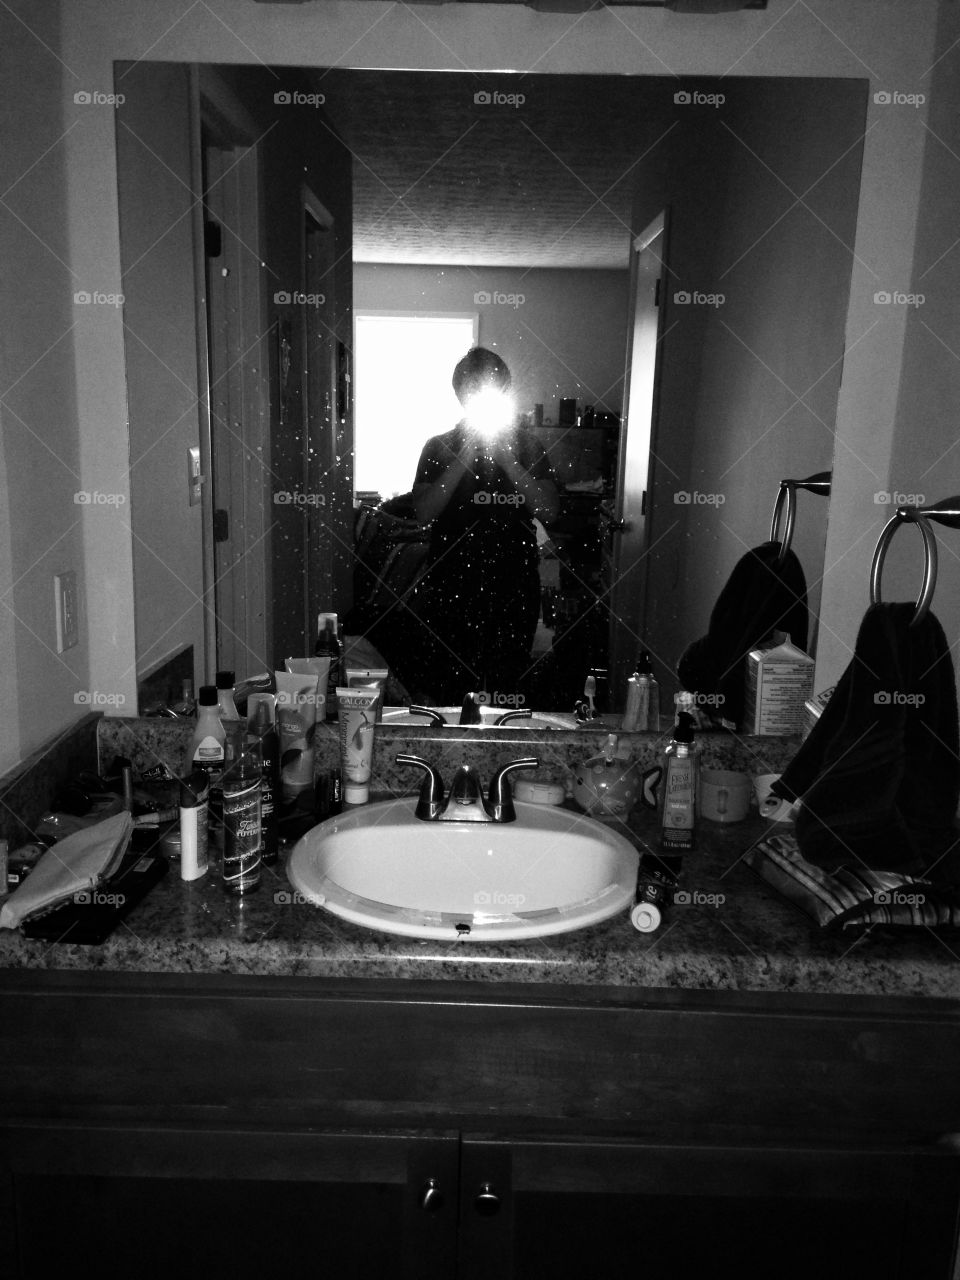 Short-haired person taking a mirror selfie at a cluttered bathroom sink. Flash obscures face, grayscale image.